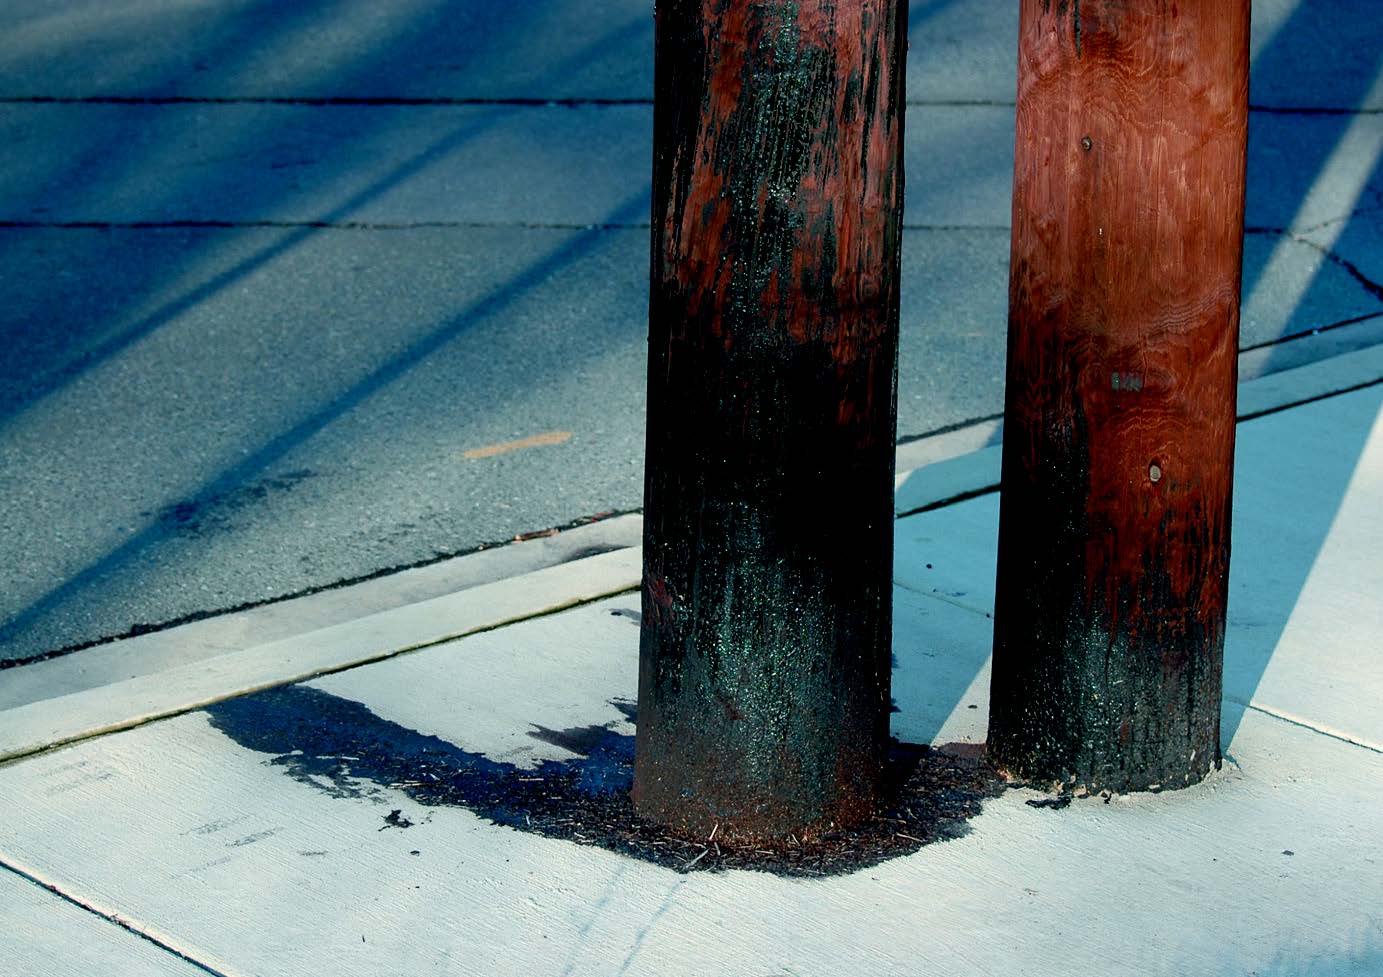 Visible chemical leaching is visible on two treated wood poles